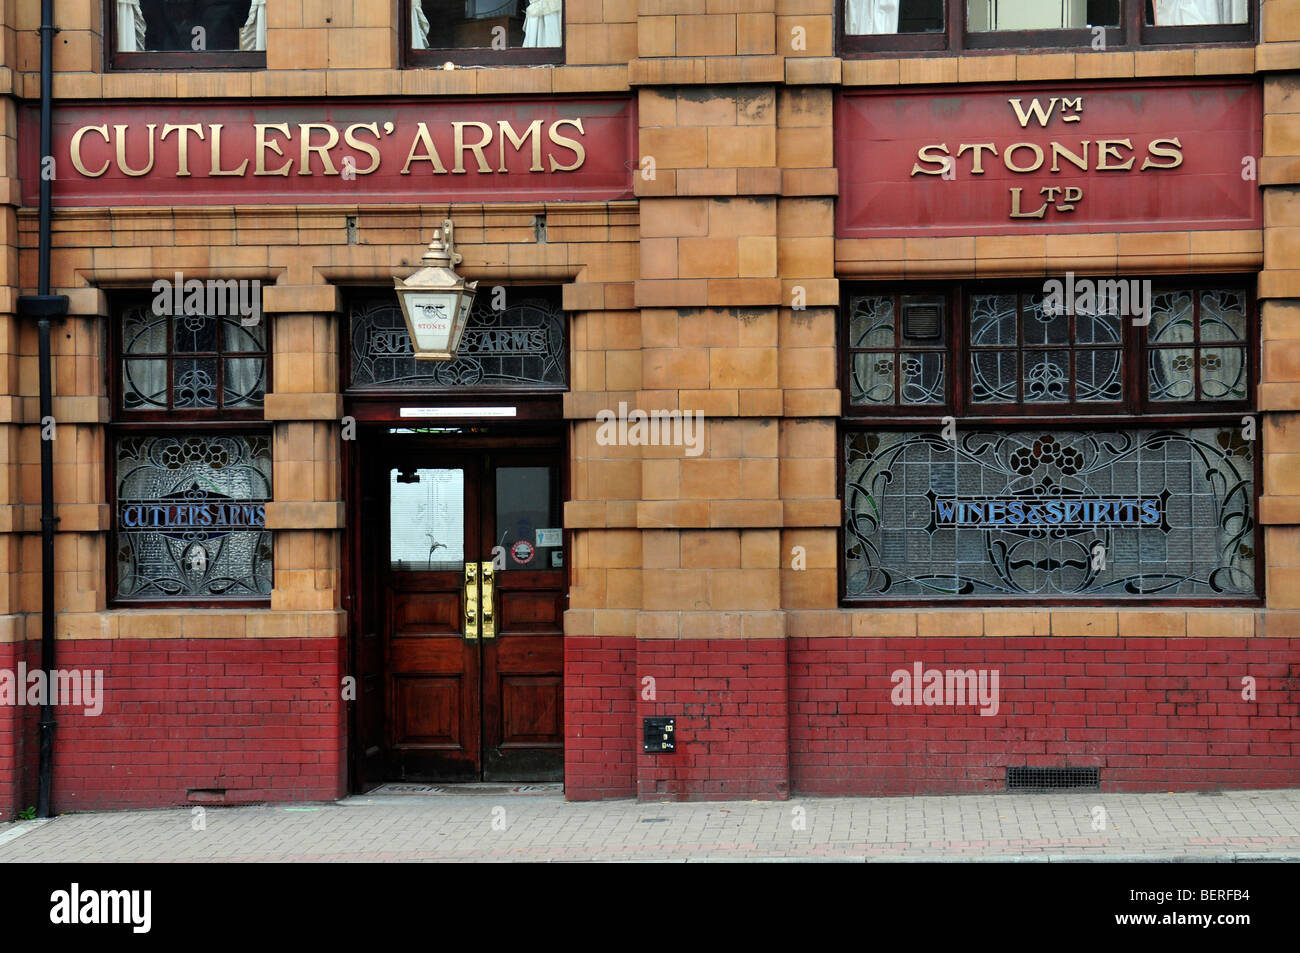 Cutler's Arms public house, Rotherham, South Yorkshire, UK Banque D'Images